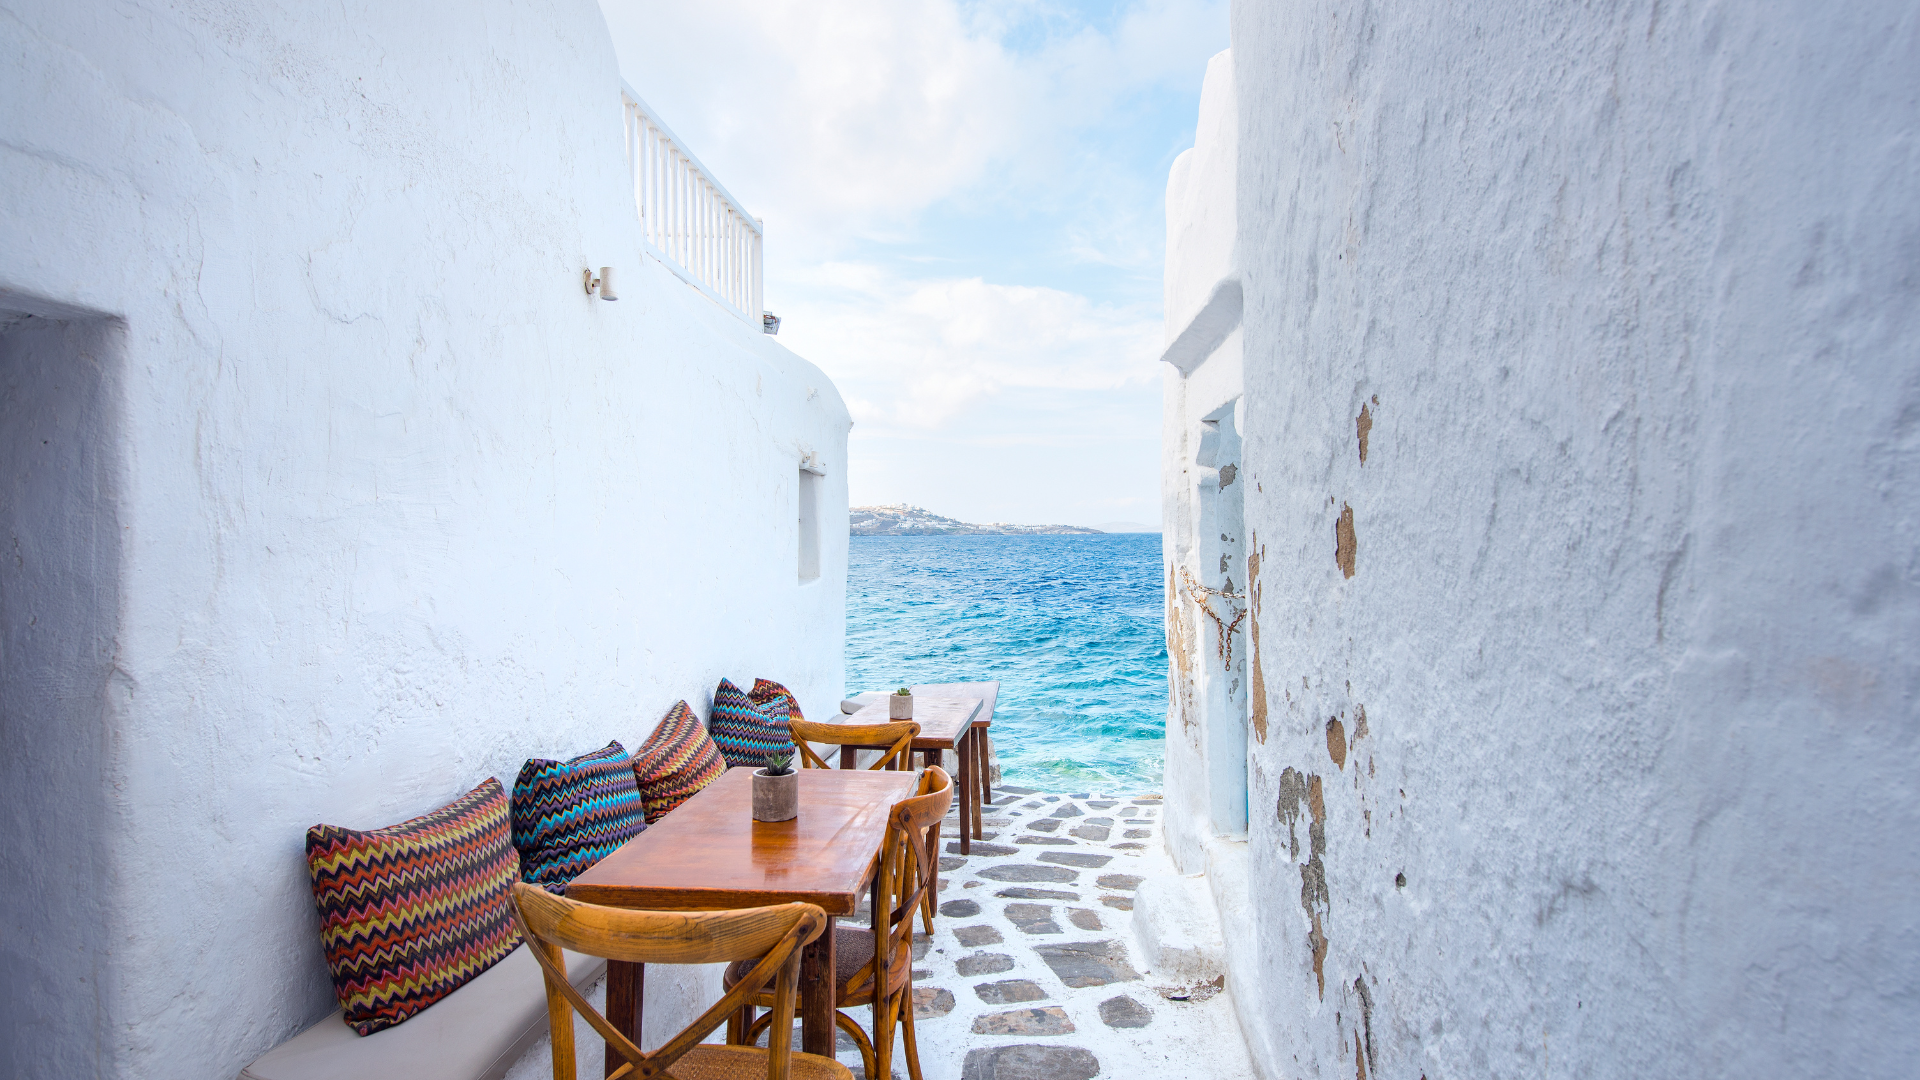 Mykonos dream villas is the perfect choise-Vivestia | Risk-Free Villas, Hotels and Cruises in VR